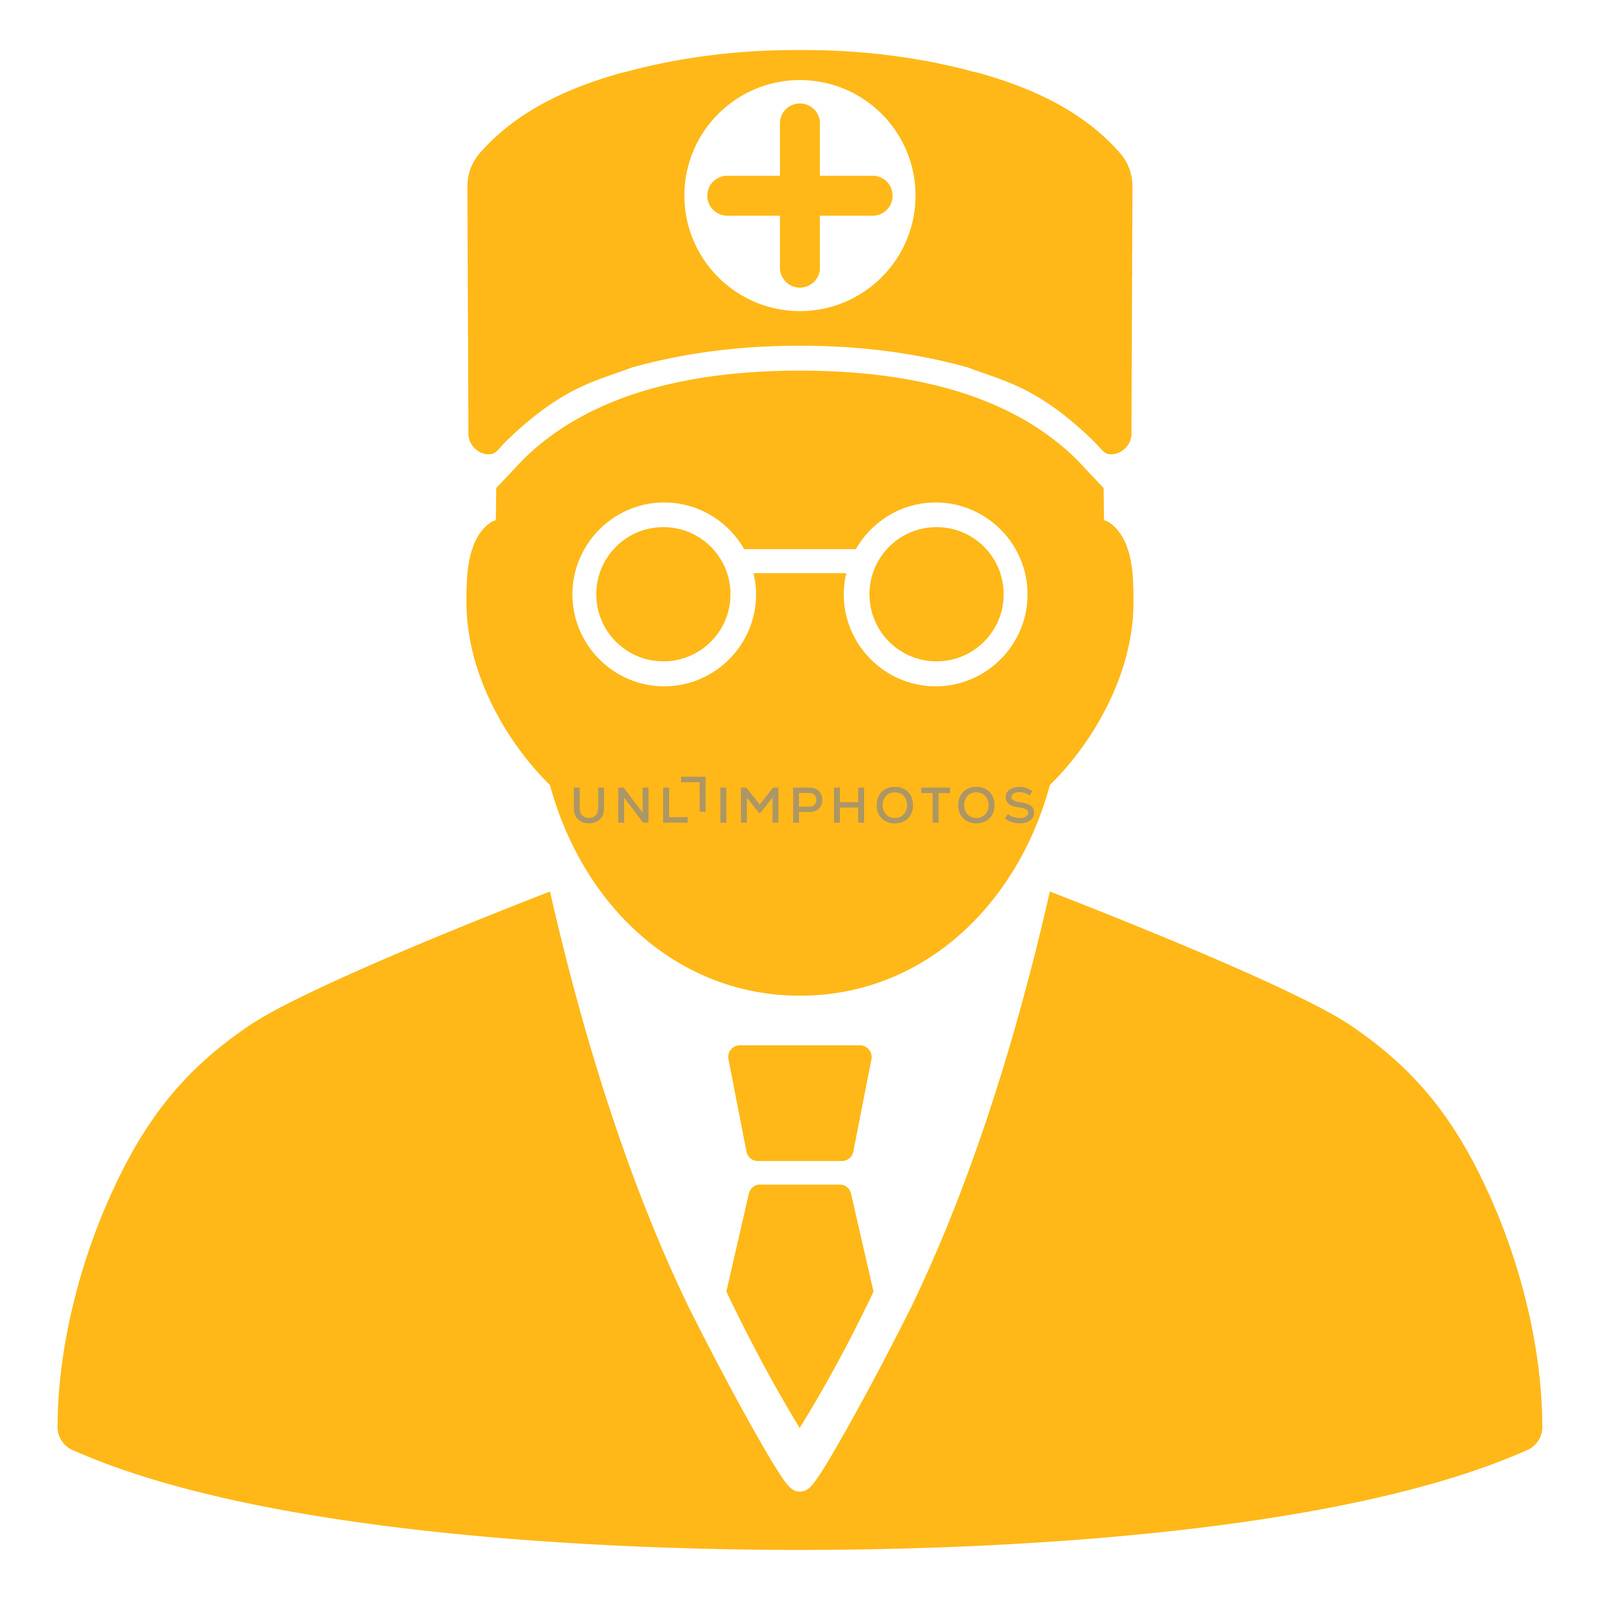 Head Physician raster icon. Style is flat symbol, yellow color, rounded angles, white background.